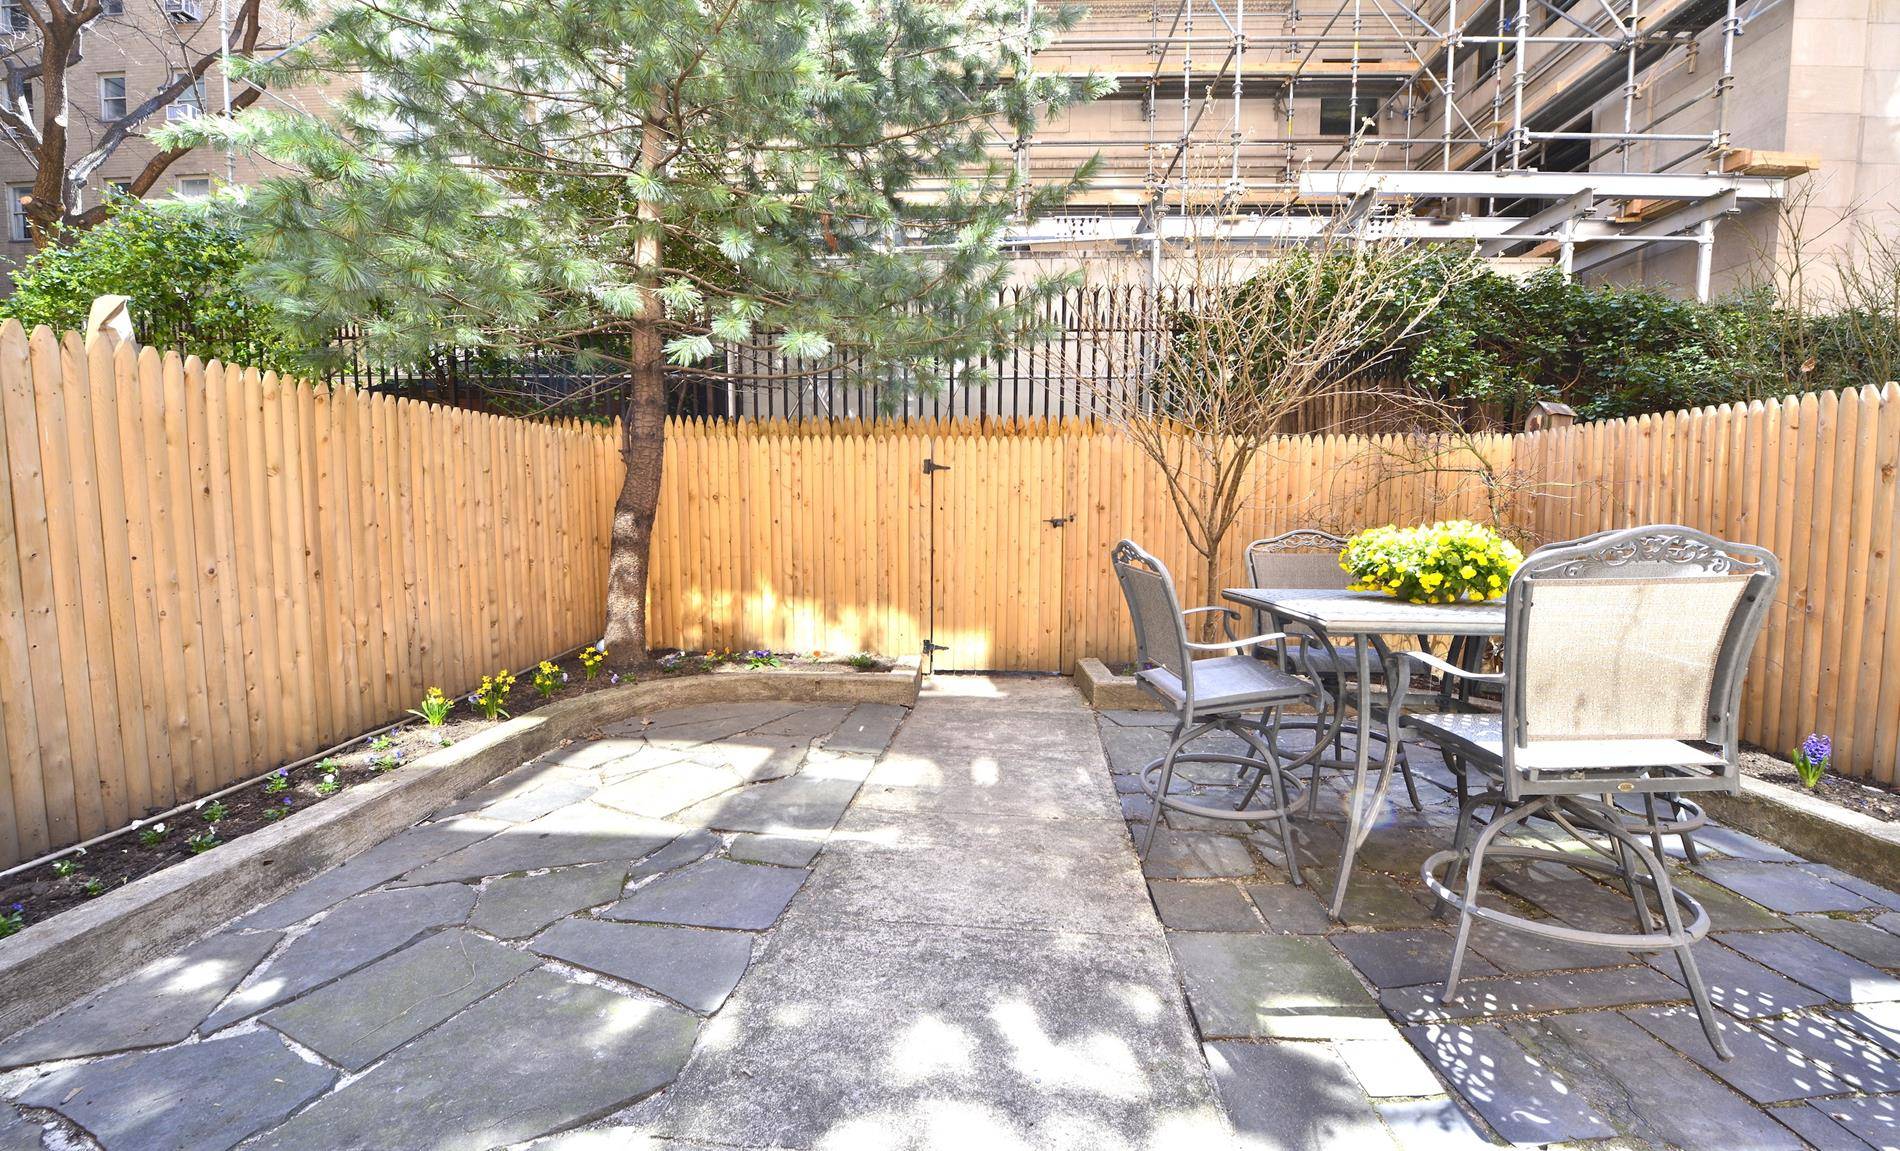 TWO BEDROOM TRIPLEX CONDO W PRIVATE OUTDOOR GARDEN SURROUNDED BY THE MORGAN LIBRARY Phenomenal sun drenched 2 bedroom 2.